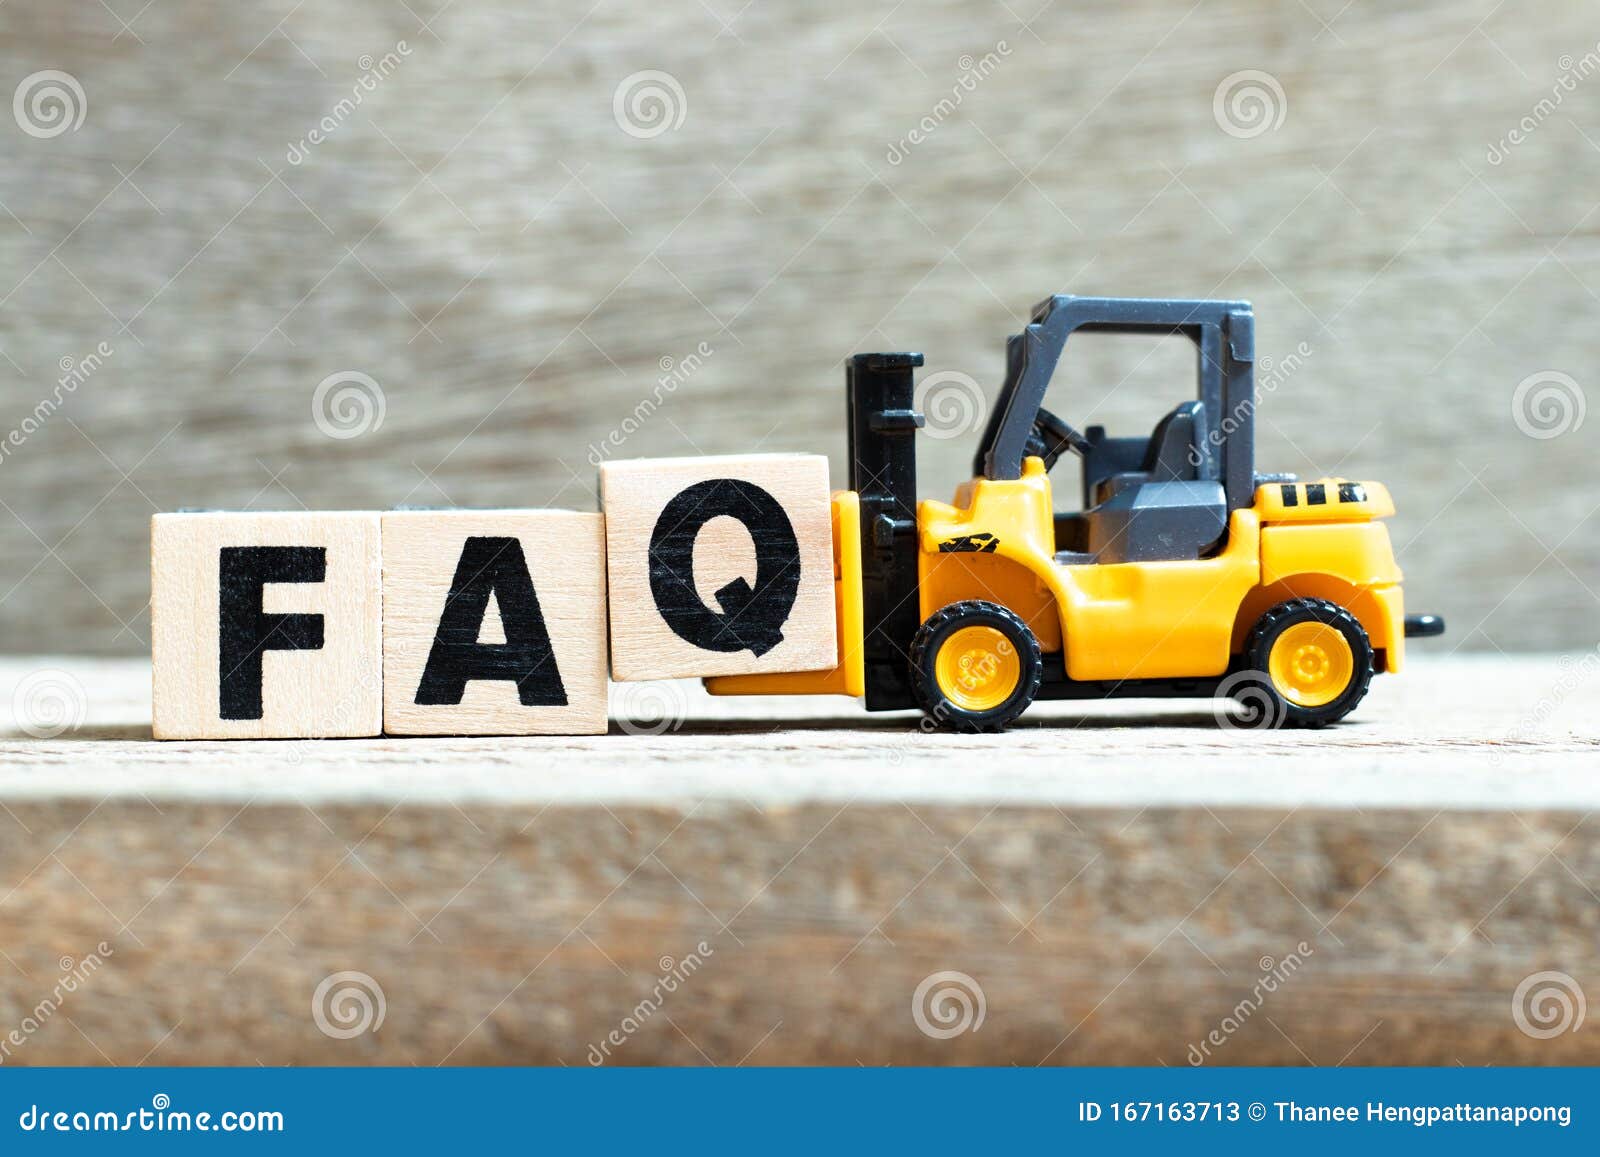 toy forklift hold block q to complete word faq abbreviation of frequently asked questions on wood background